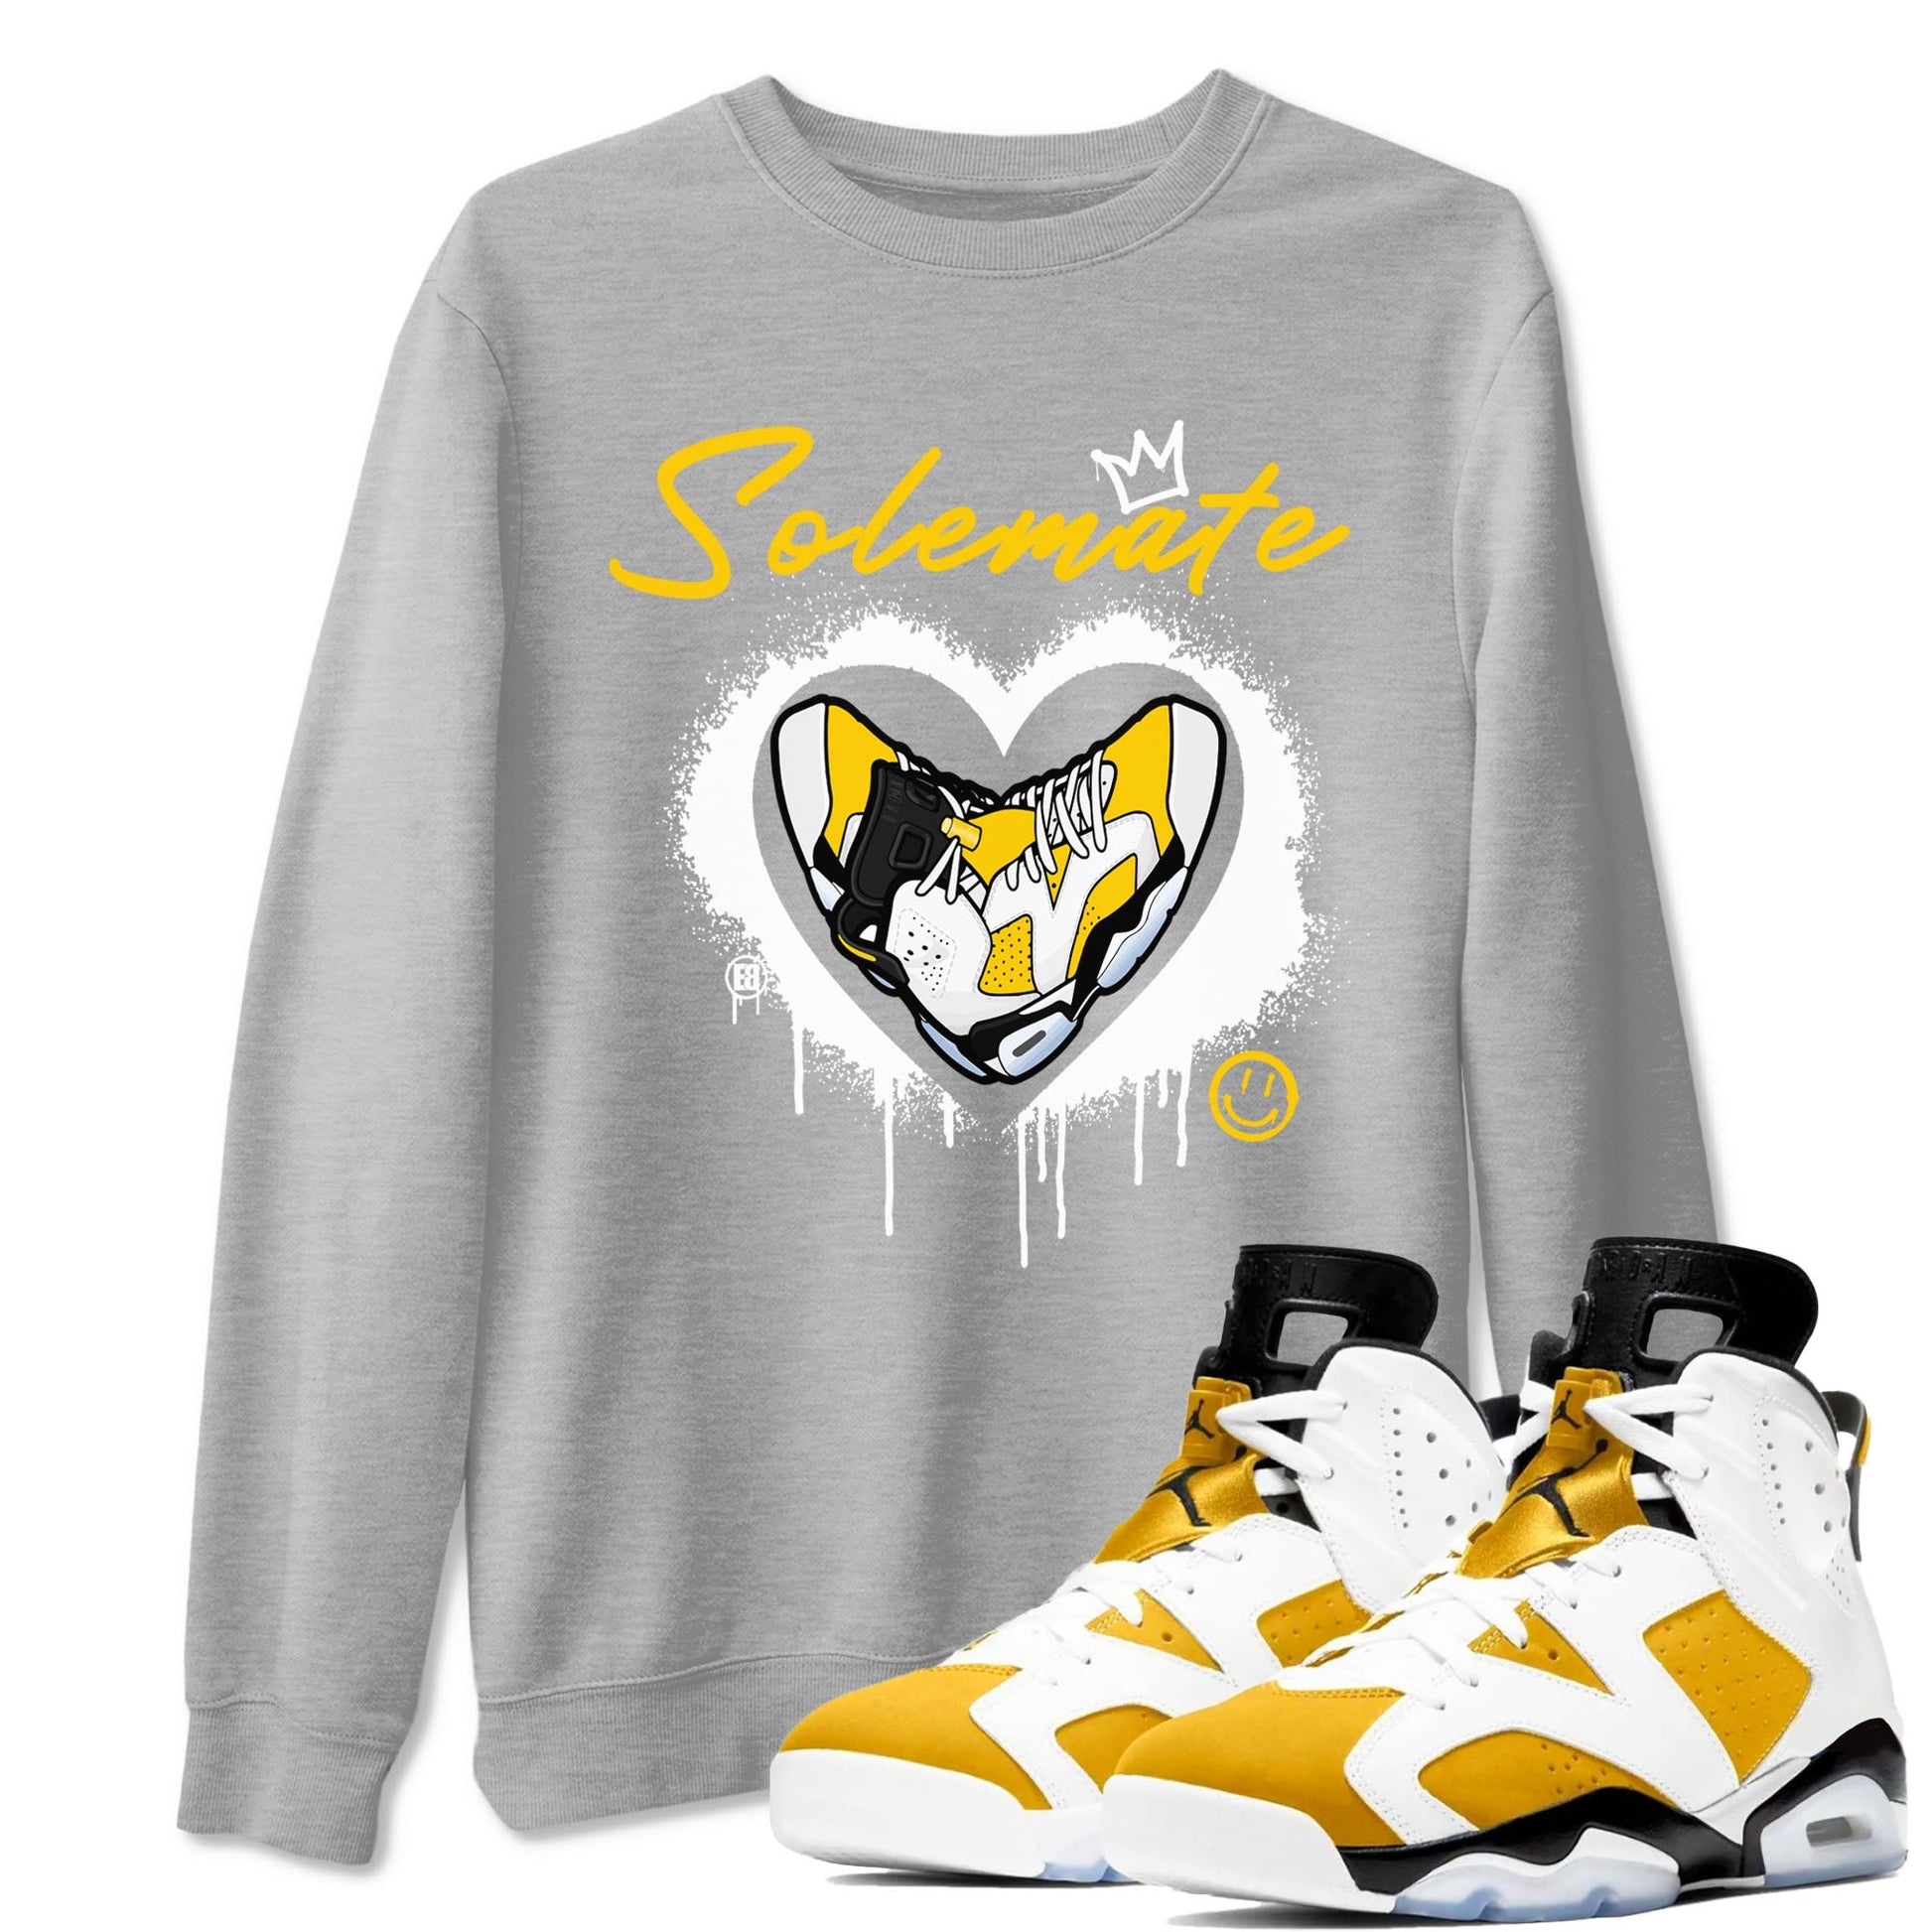 Solemate sneaker match tees to 6s Yellow Ochre street fashion brand for shirts to match Jordans SNRT Sneaker Tees Air Jordan 6 Yellow Ochre unisex t-shirt Heather Grey 1 unisex shirt